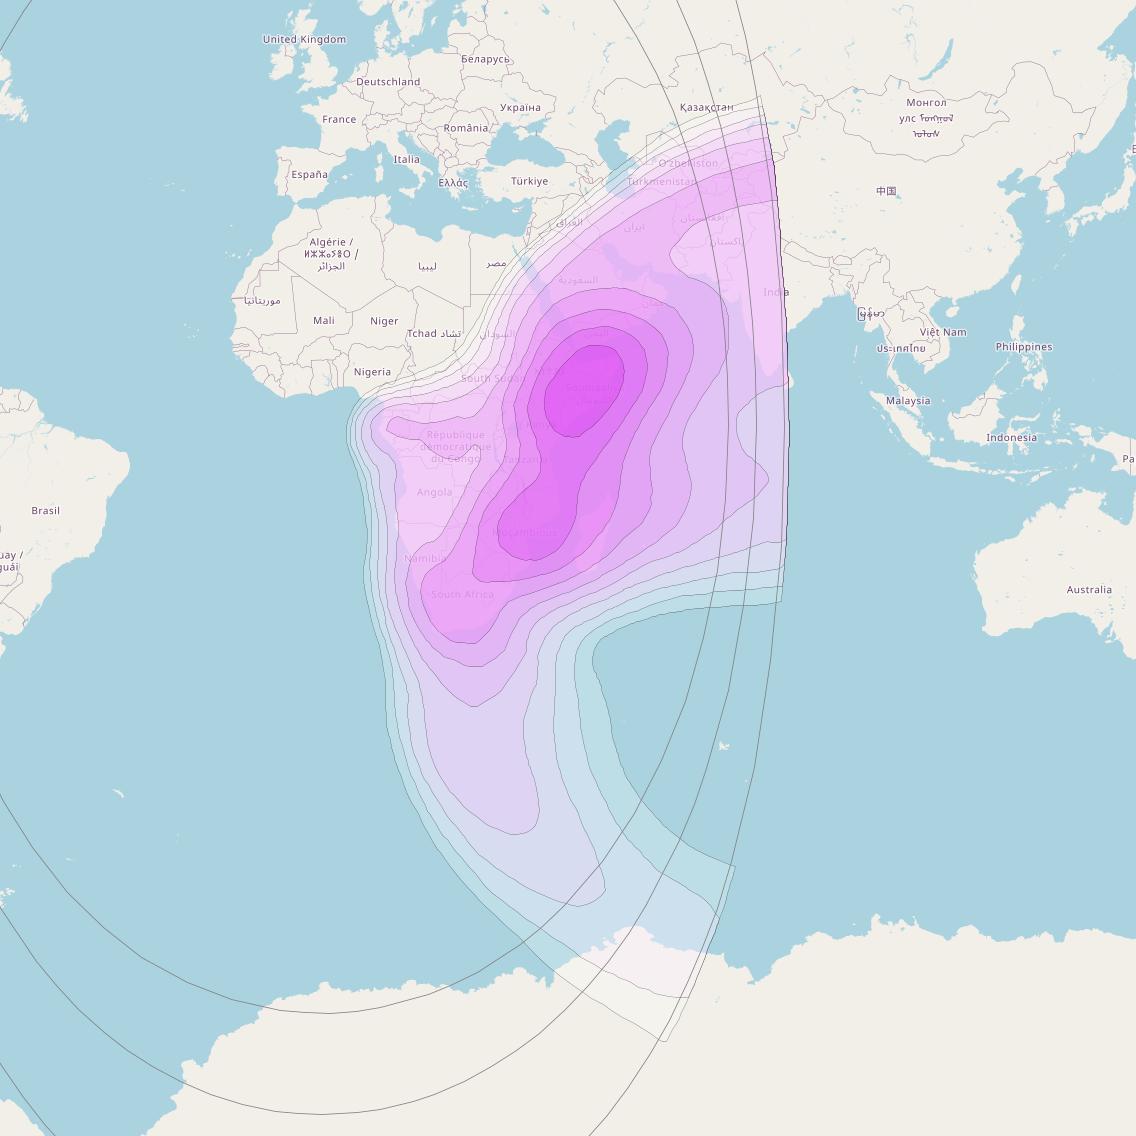 Intelsat 10-02 + MEV2 at 1° W downlink C-band South East Zone Beam coverage map